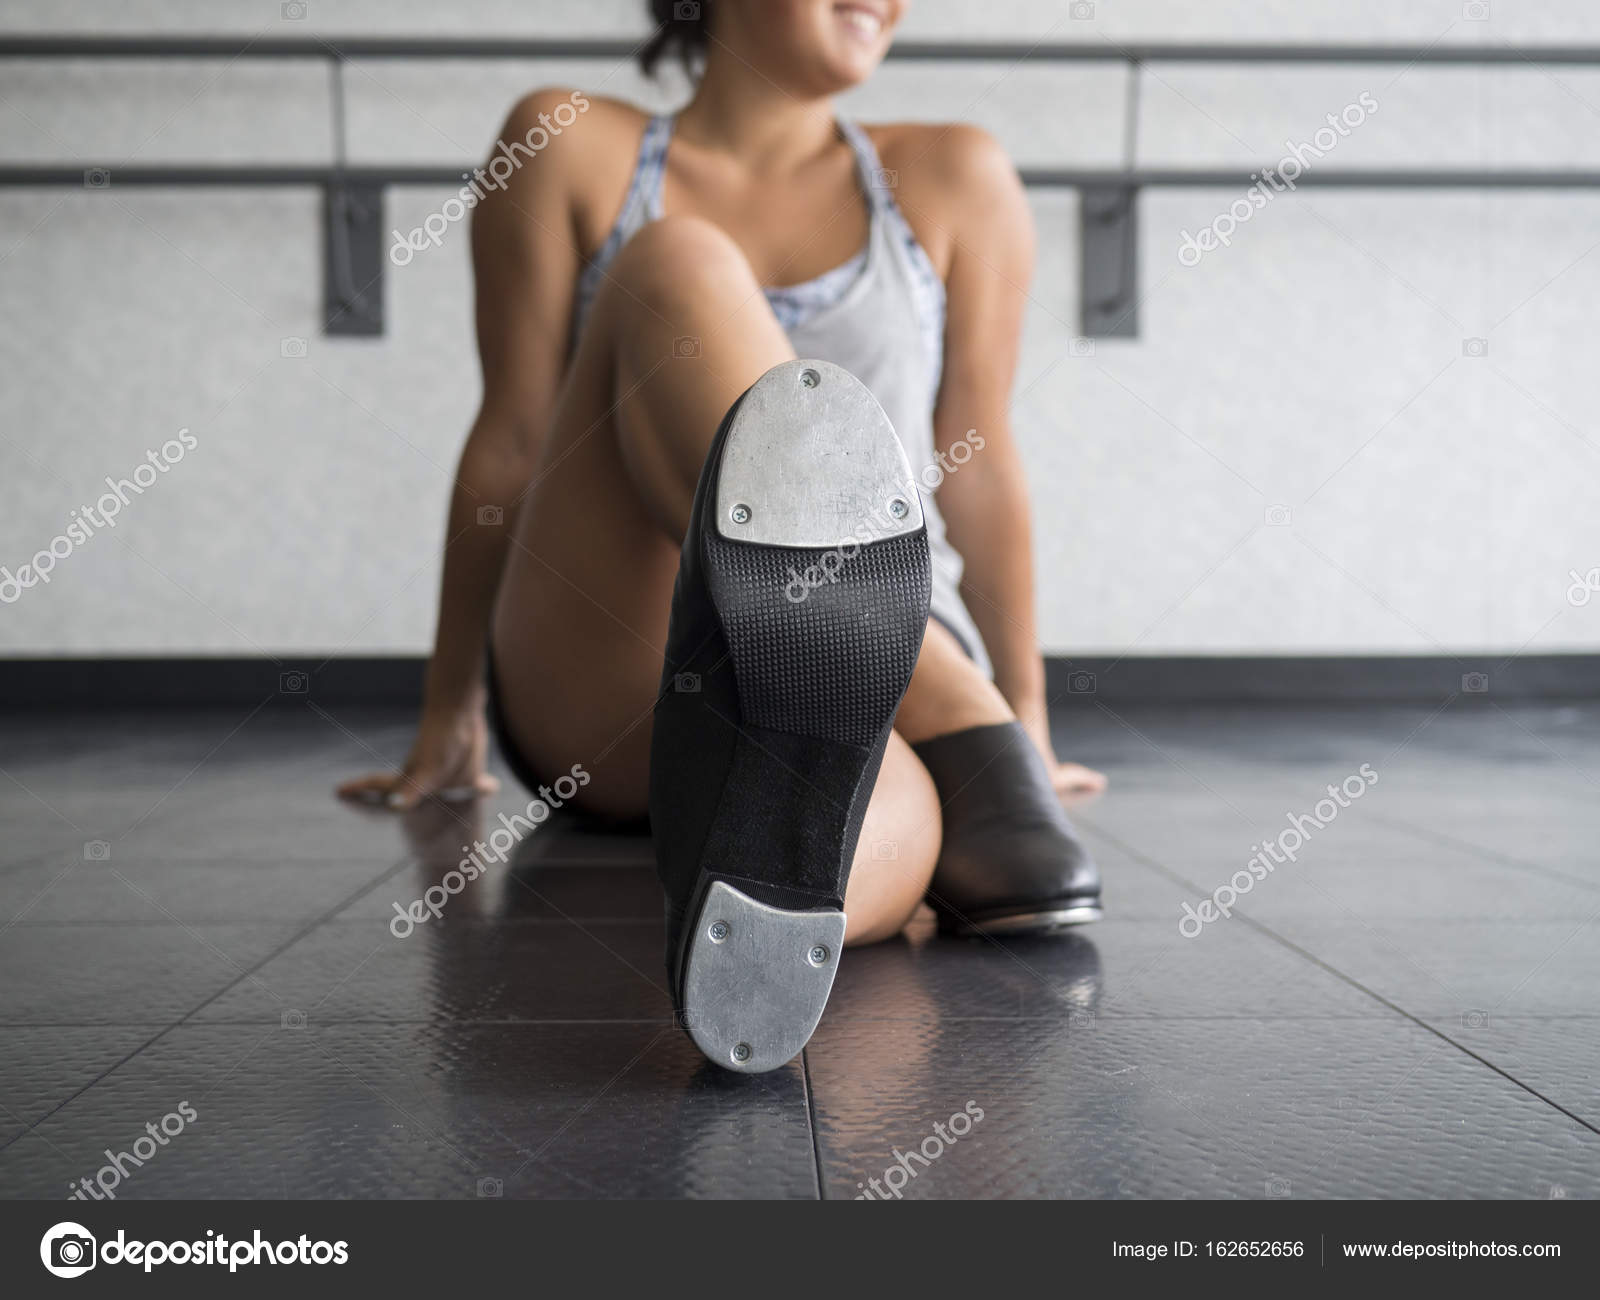 Dancer Sitting Crossed Legged Dance Studio Showing Her Taps Stock Photo by  ©kbycphotography 162652656